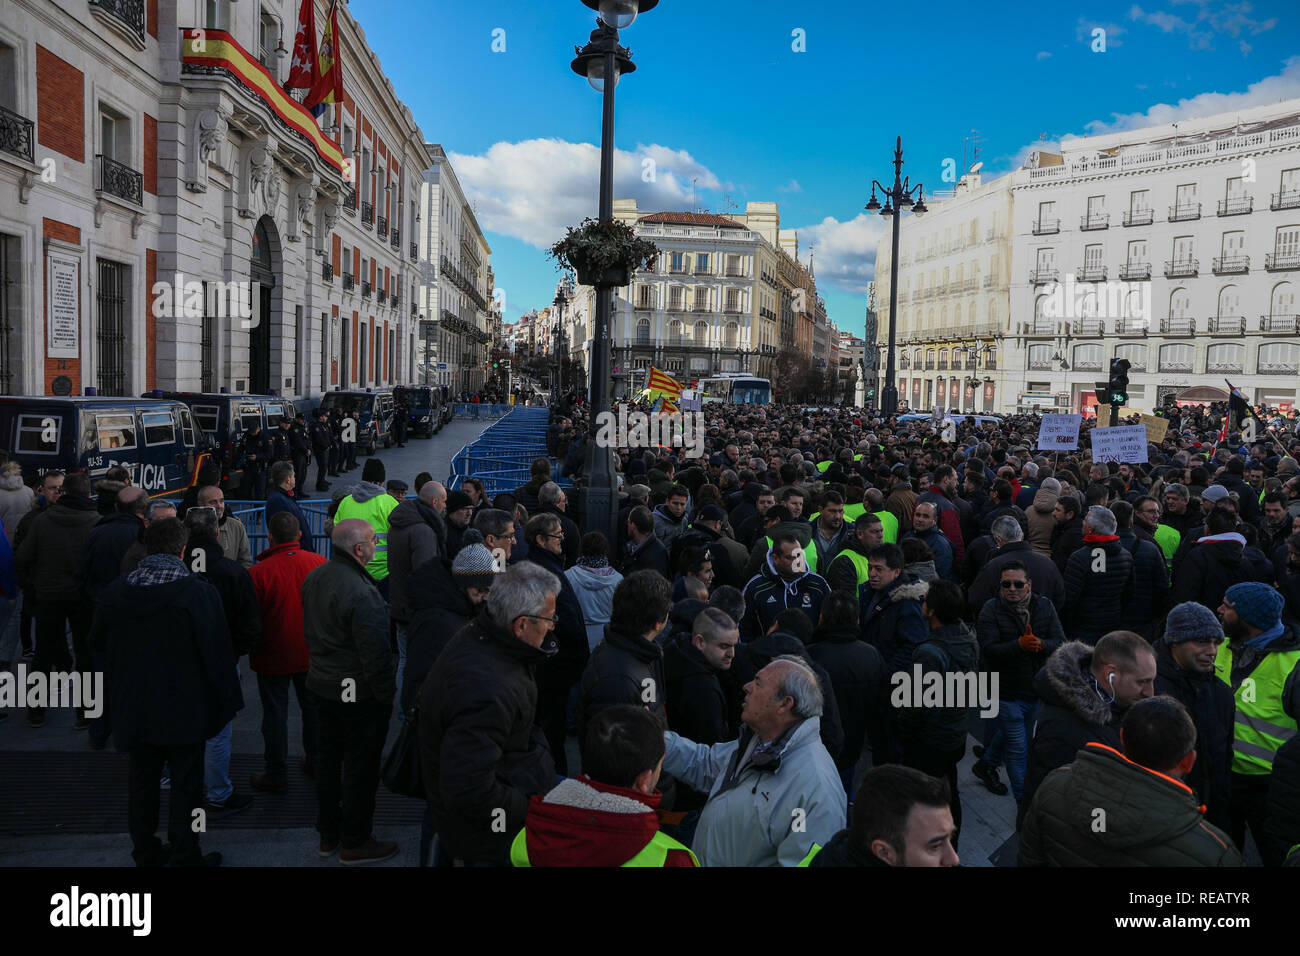 Madrid, Spain. 21st January, 2019. Demonstrators at Puerta del Sol protesting the conditions of the taxi. The taxi drivers from Madrid, who have started a strike on Monday, have announced that they maintain the indefinite strike after reaching no pre-agreement with the president of the Community of Madrid Credit: Jesús Hellin/Alamy Live News Stock Photo